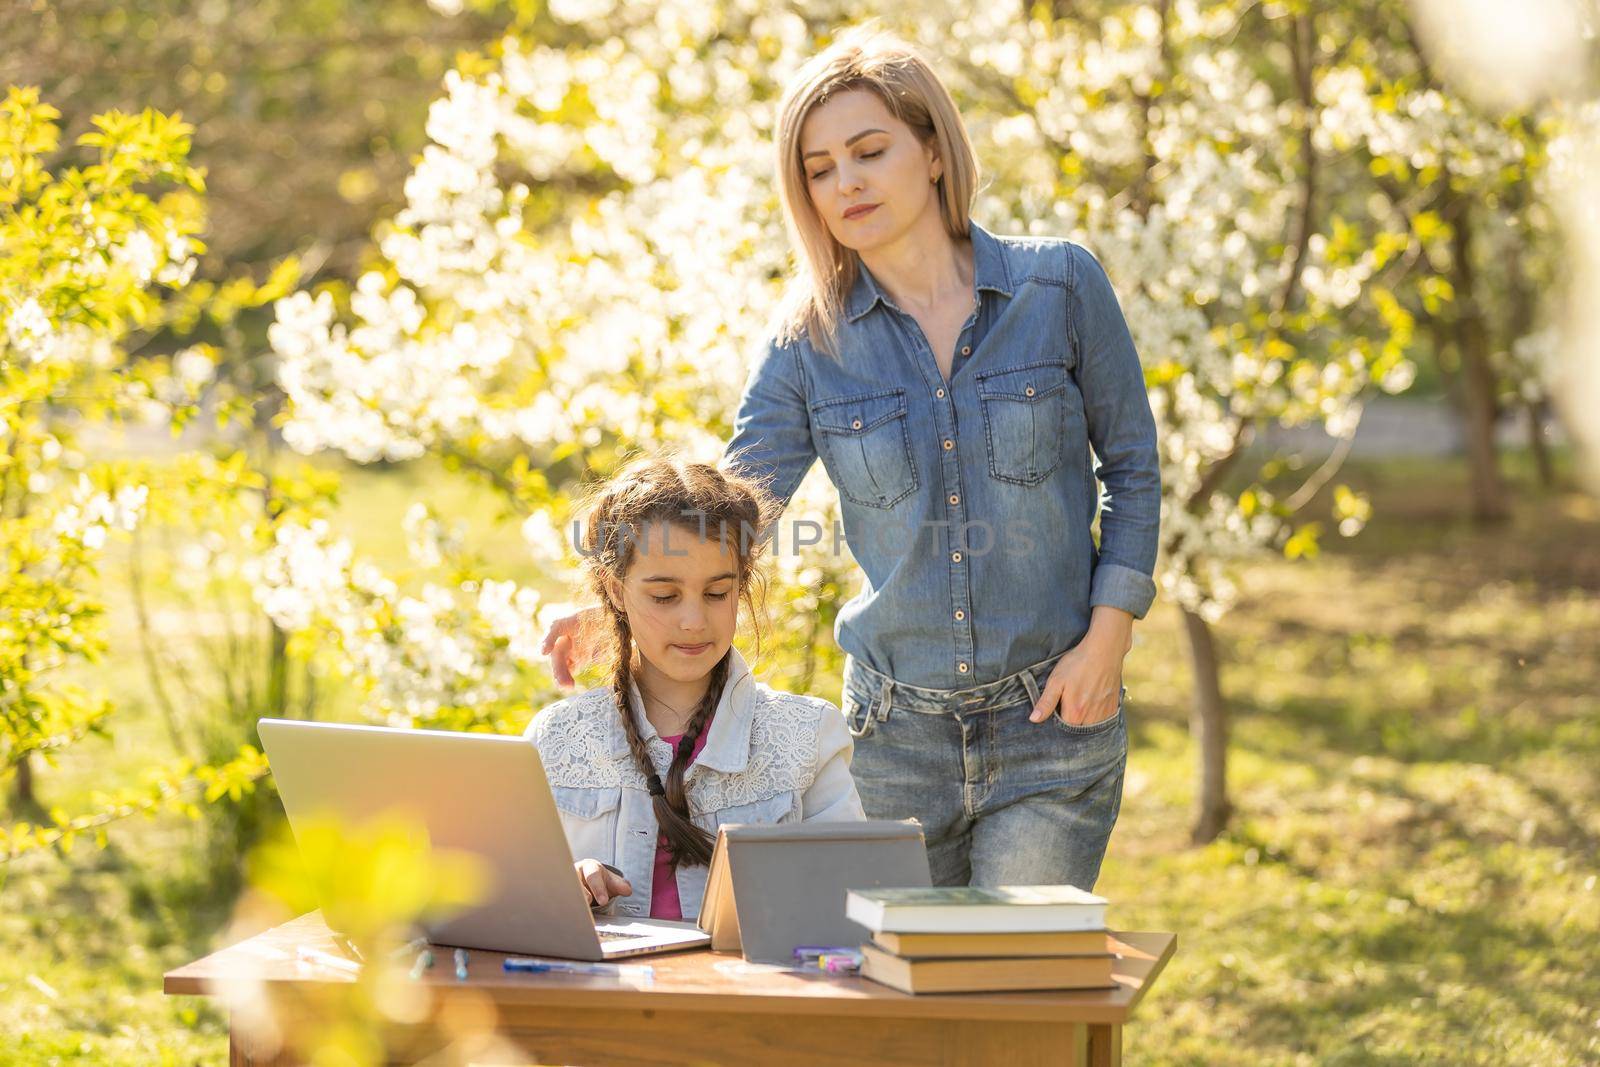 Beautiful mom with little daughter resting with a laptop in the park on a sunny day. Study, Learning, harmony, happiness, paradise - concept.